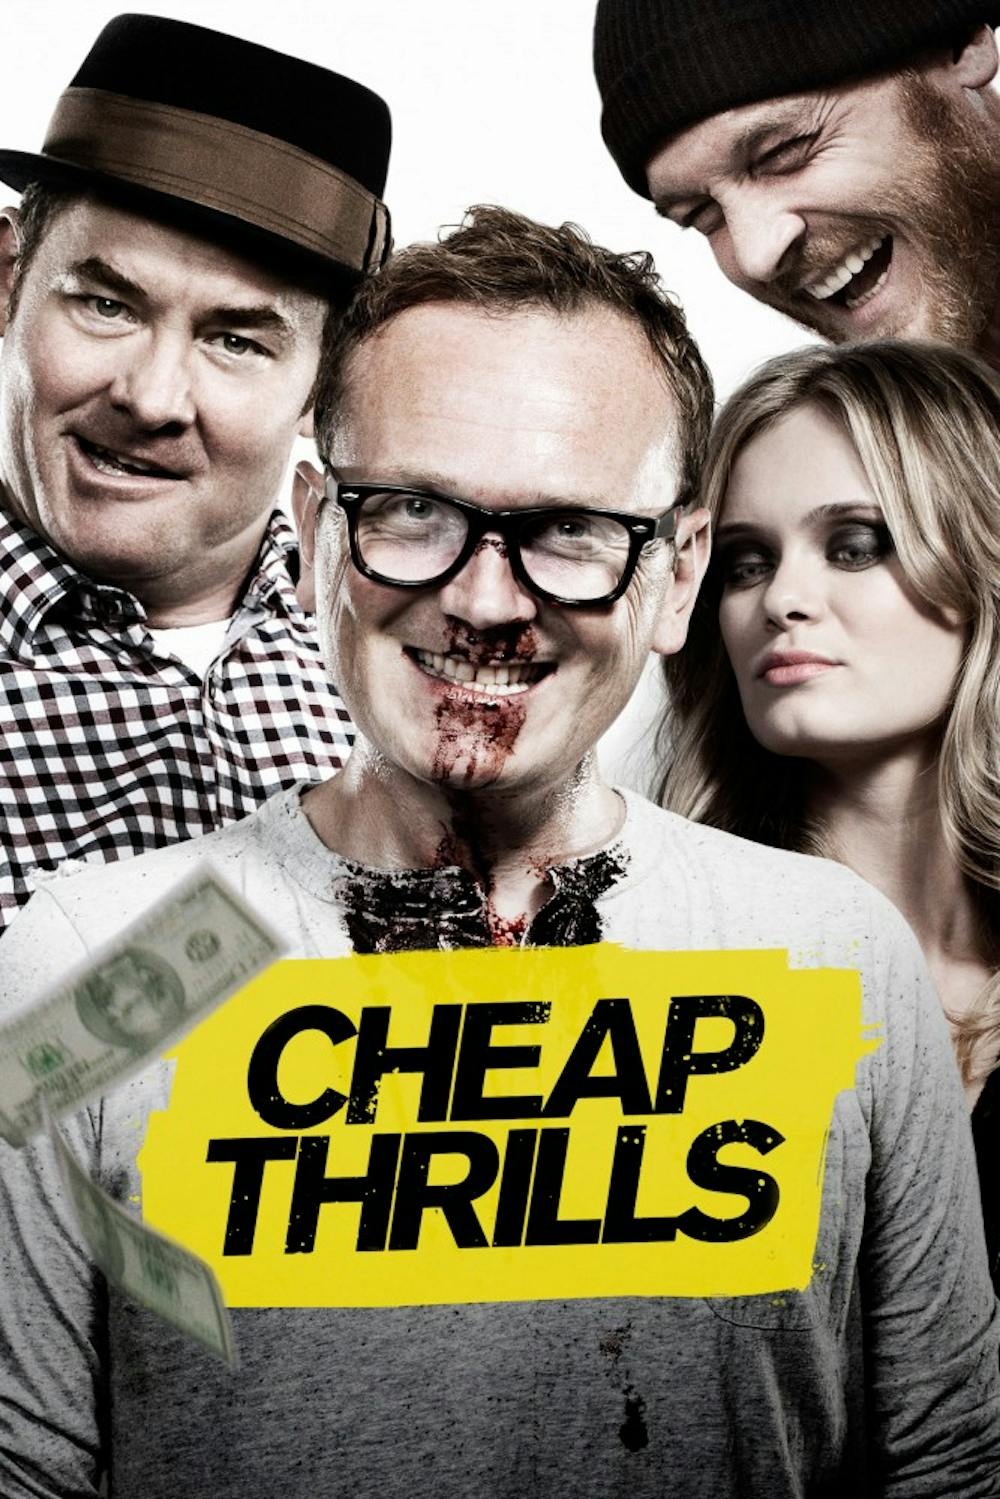 Beneath the Reel: 'Cheap Thrills' exposes three poisons of humanity